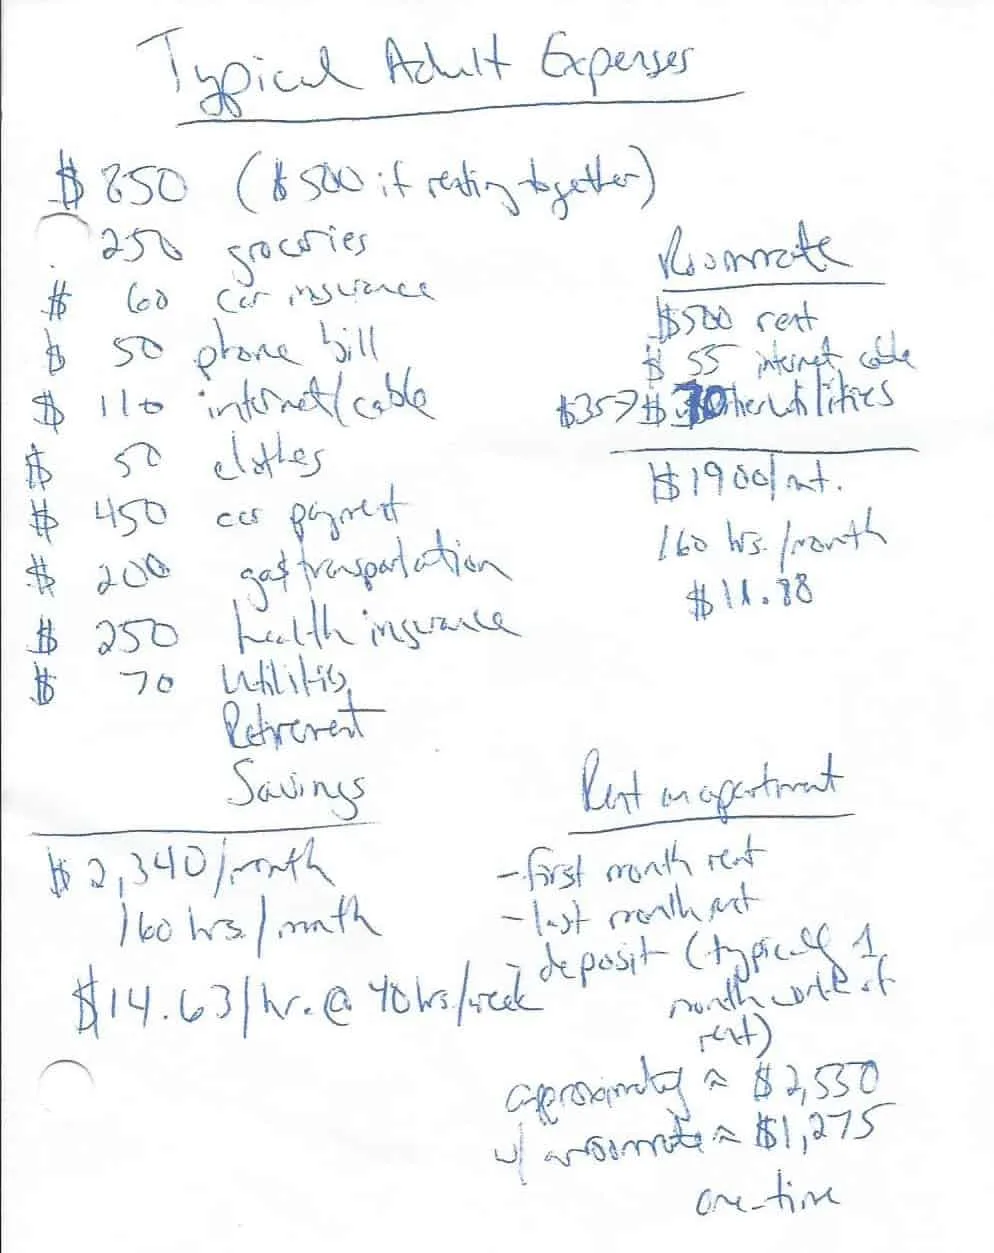 handwritten typical adult expenses for a single person budget, with and without a roommate